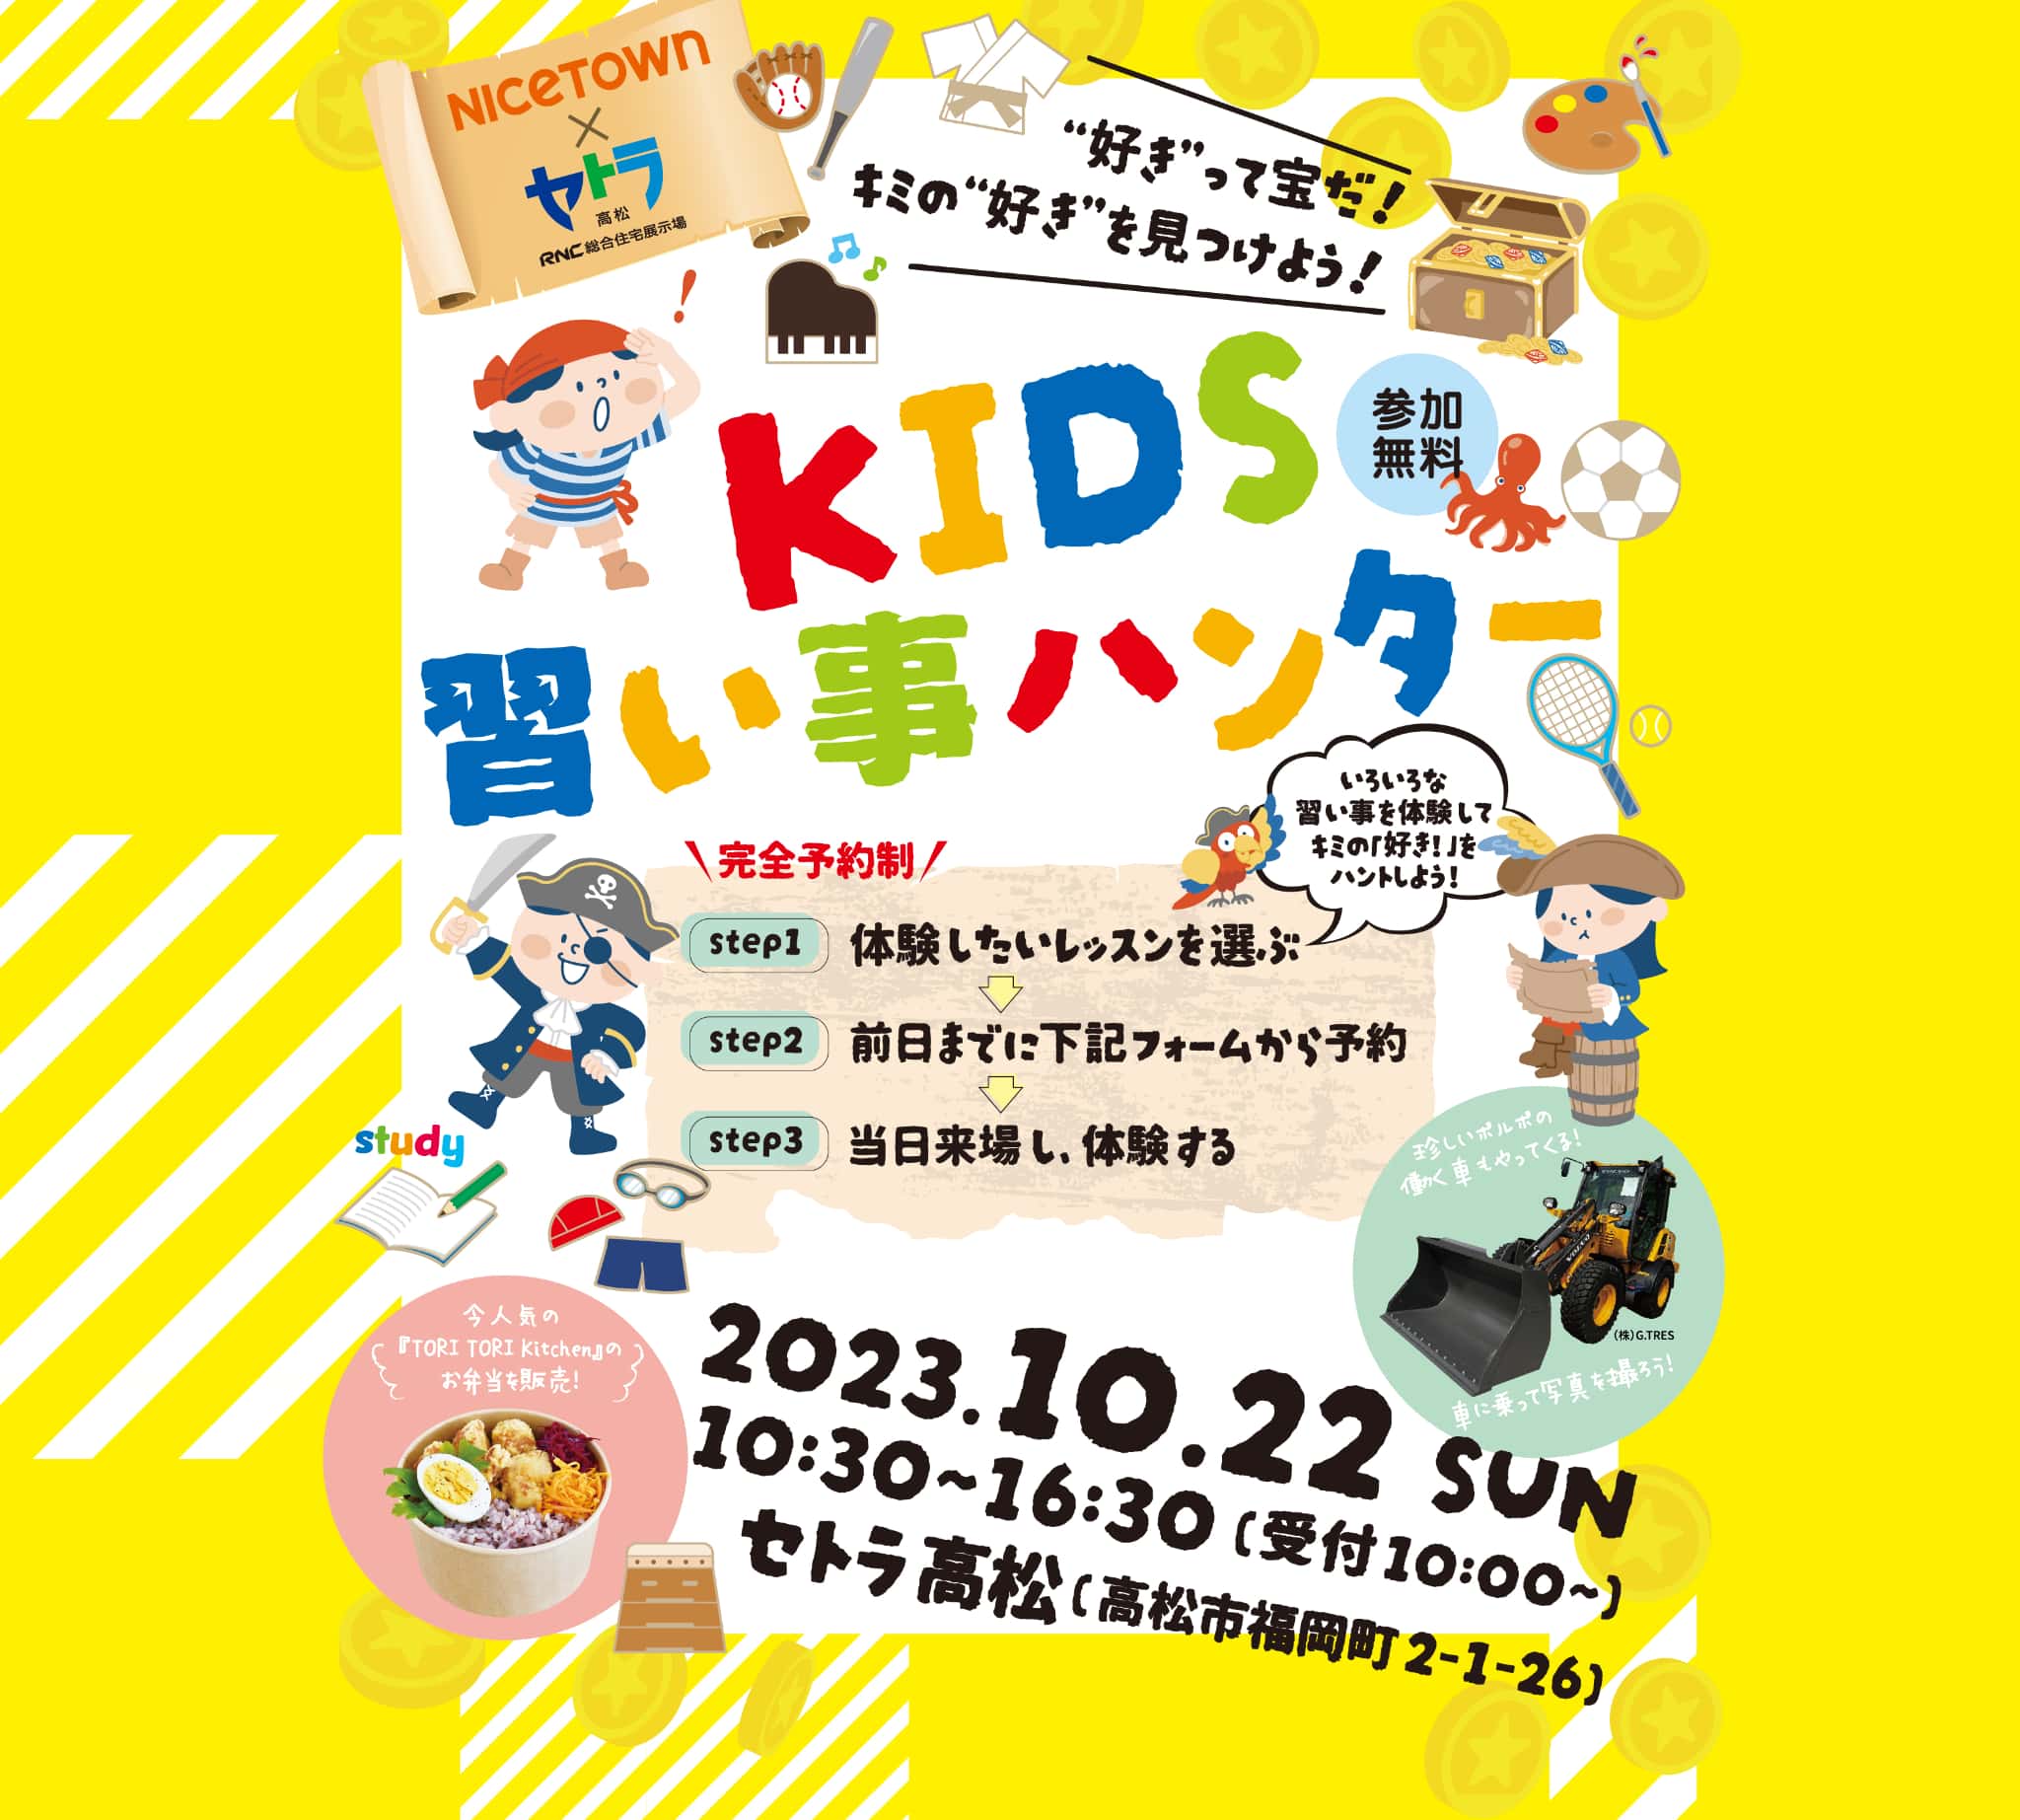 KIDS習い事ハンター 2023年10月22日 10:30〜16:30（受付10:00〜）